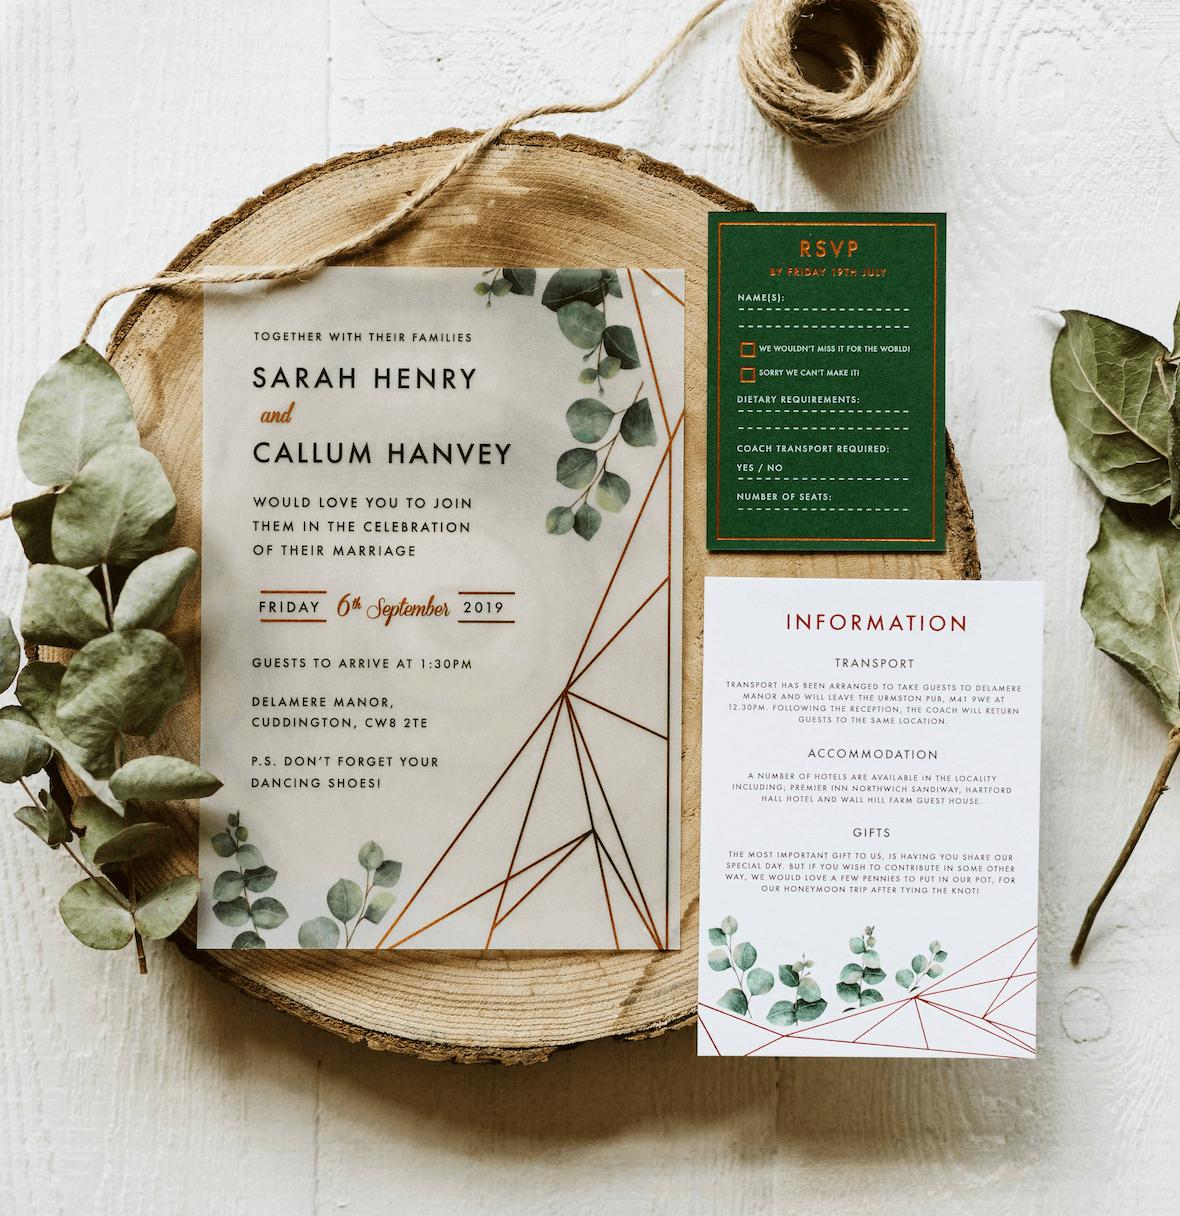 An Enchanting Opening Ceremony Invitation Set on a Captivating